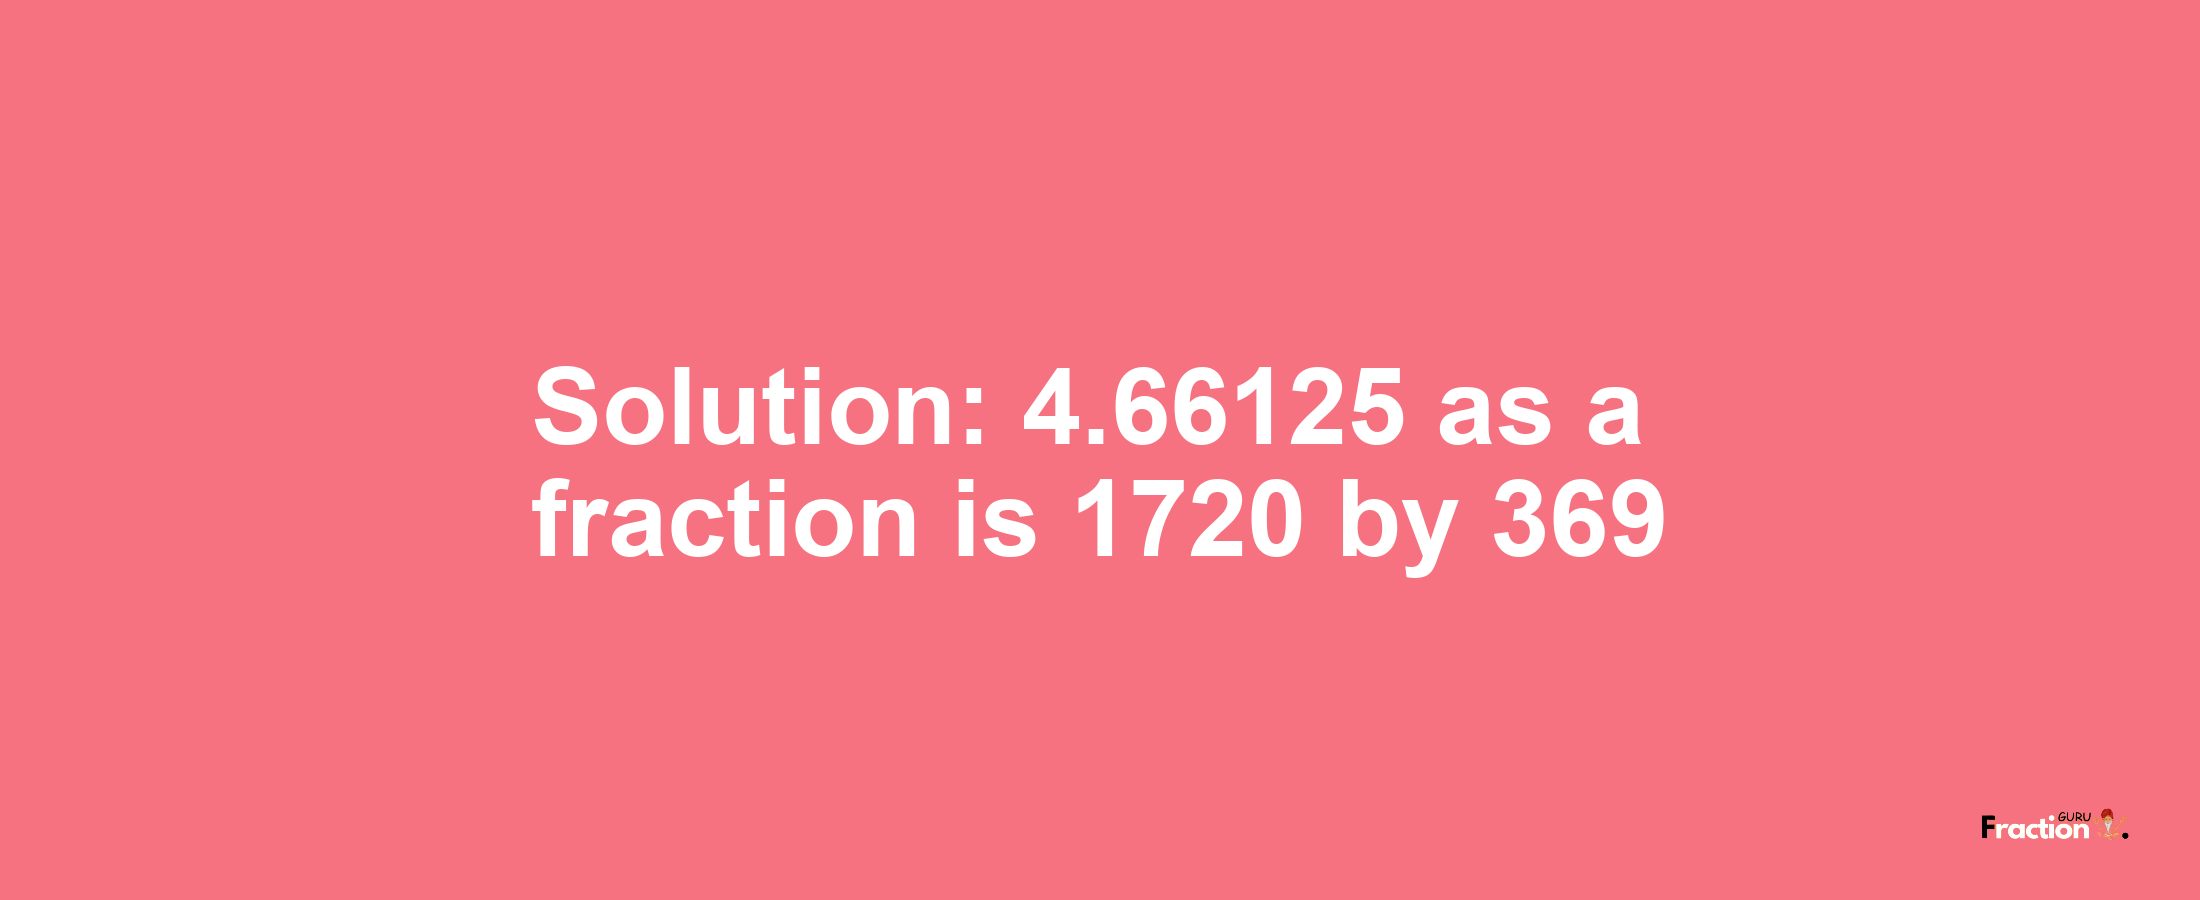 Solution:4.66125 as a fraction is 1720/369